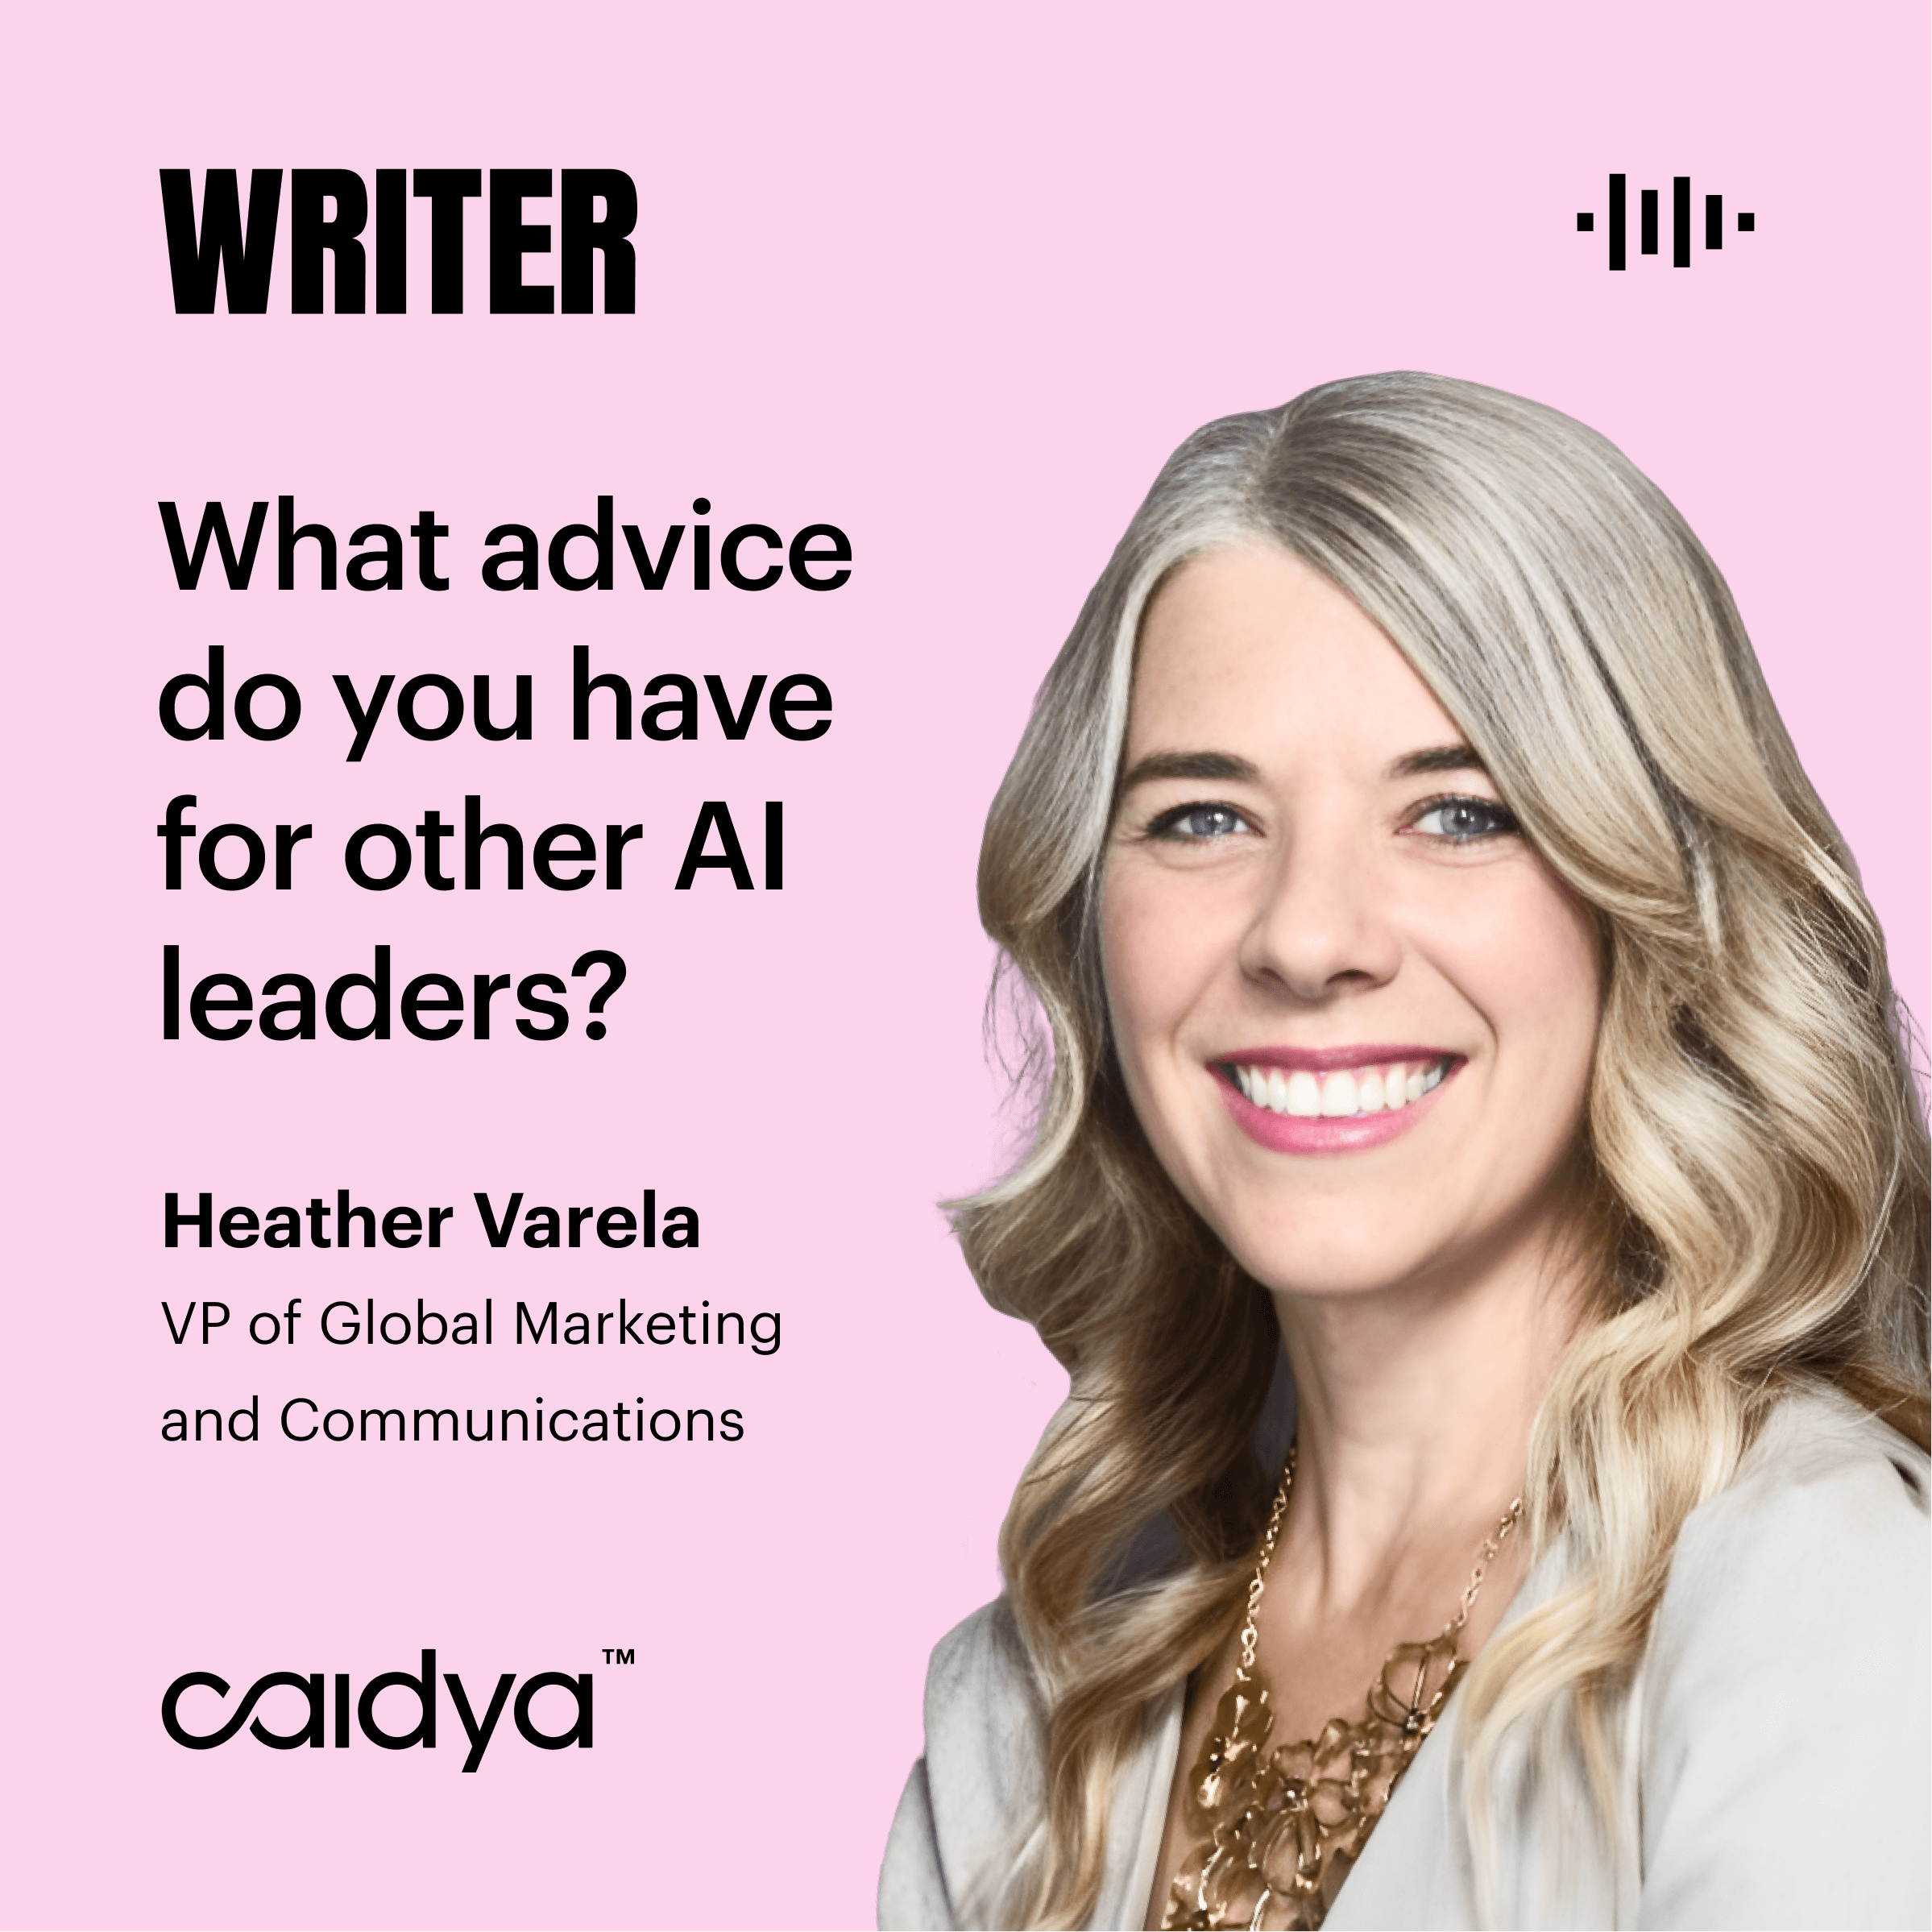 What advice do you have for other AI leaders?